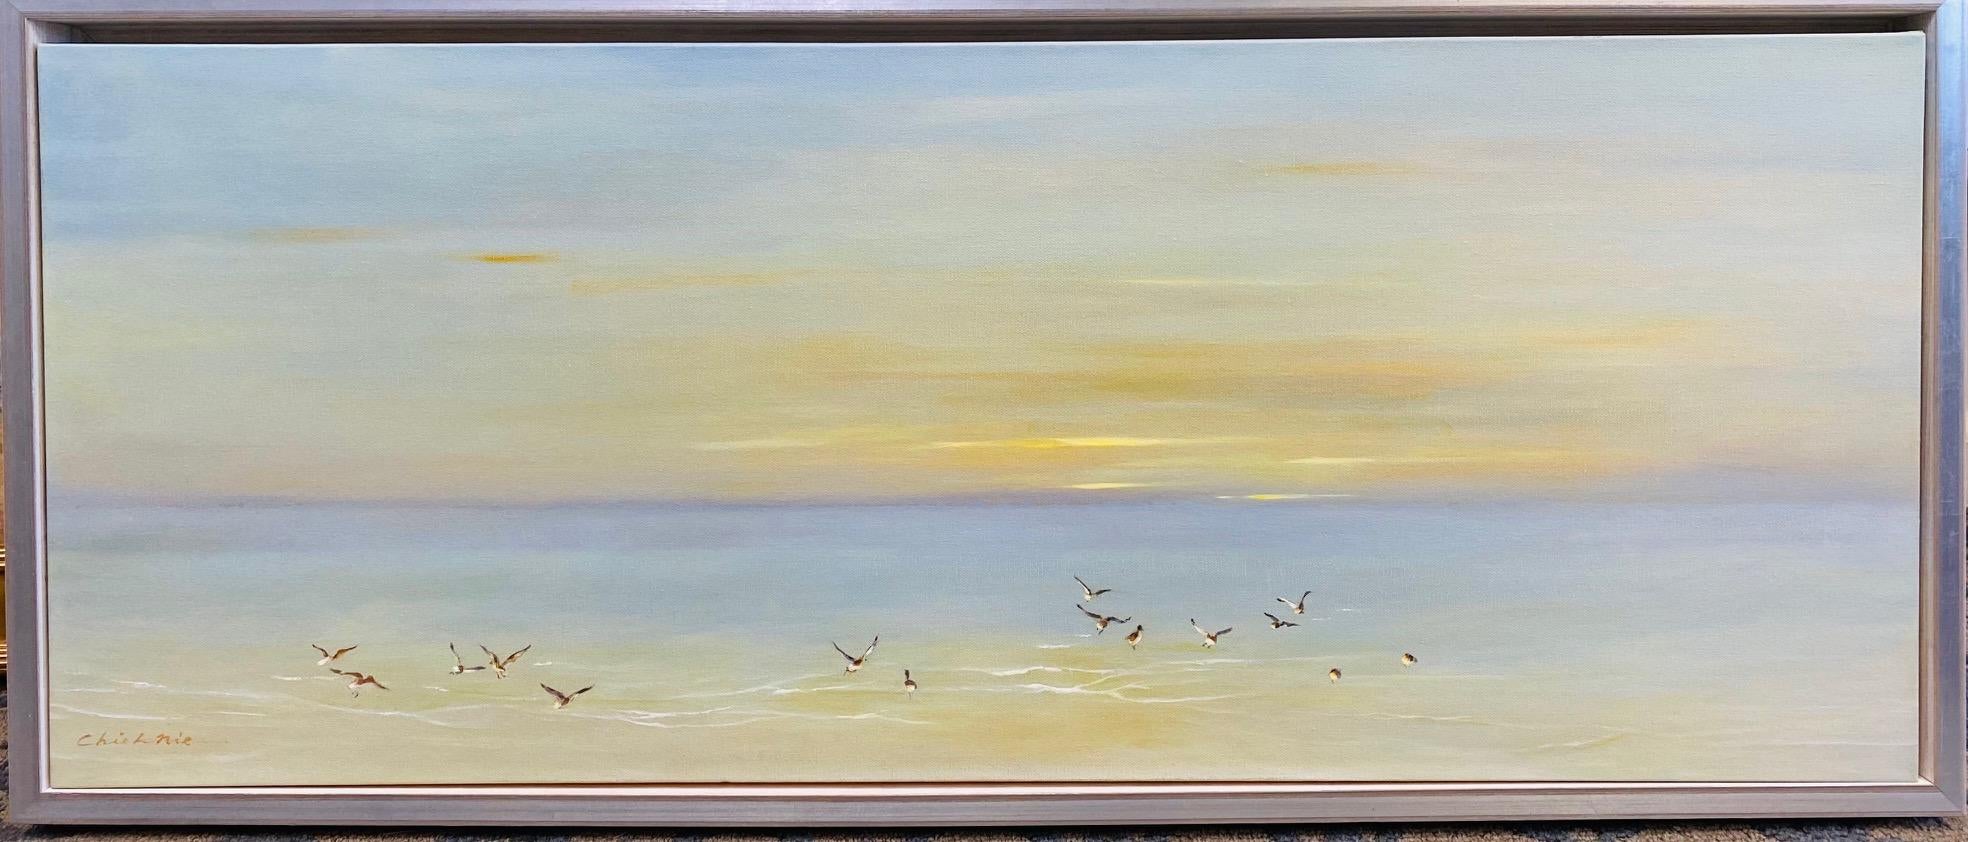 Chieh-Nie Cherng Animal Painting - Seagulls in Flight, original 16x40 contemporary marine landscape